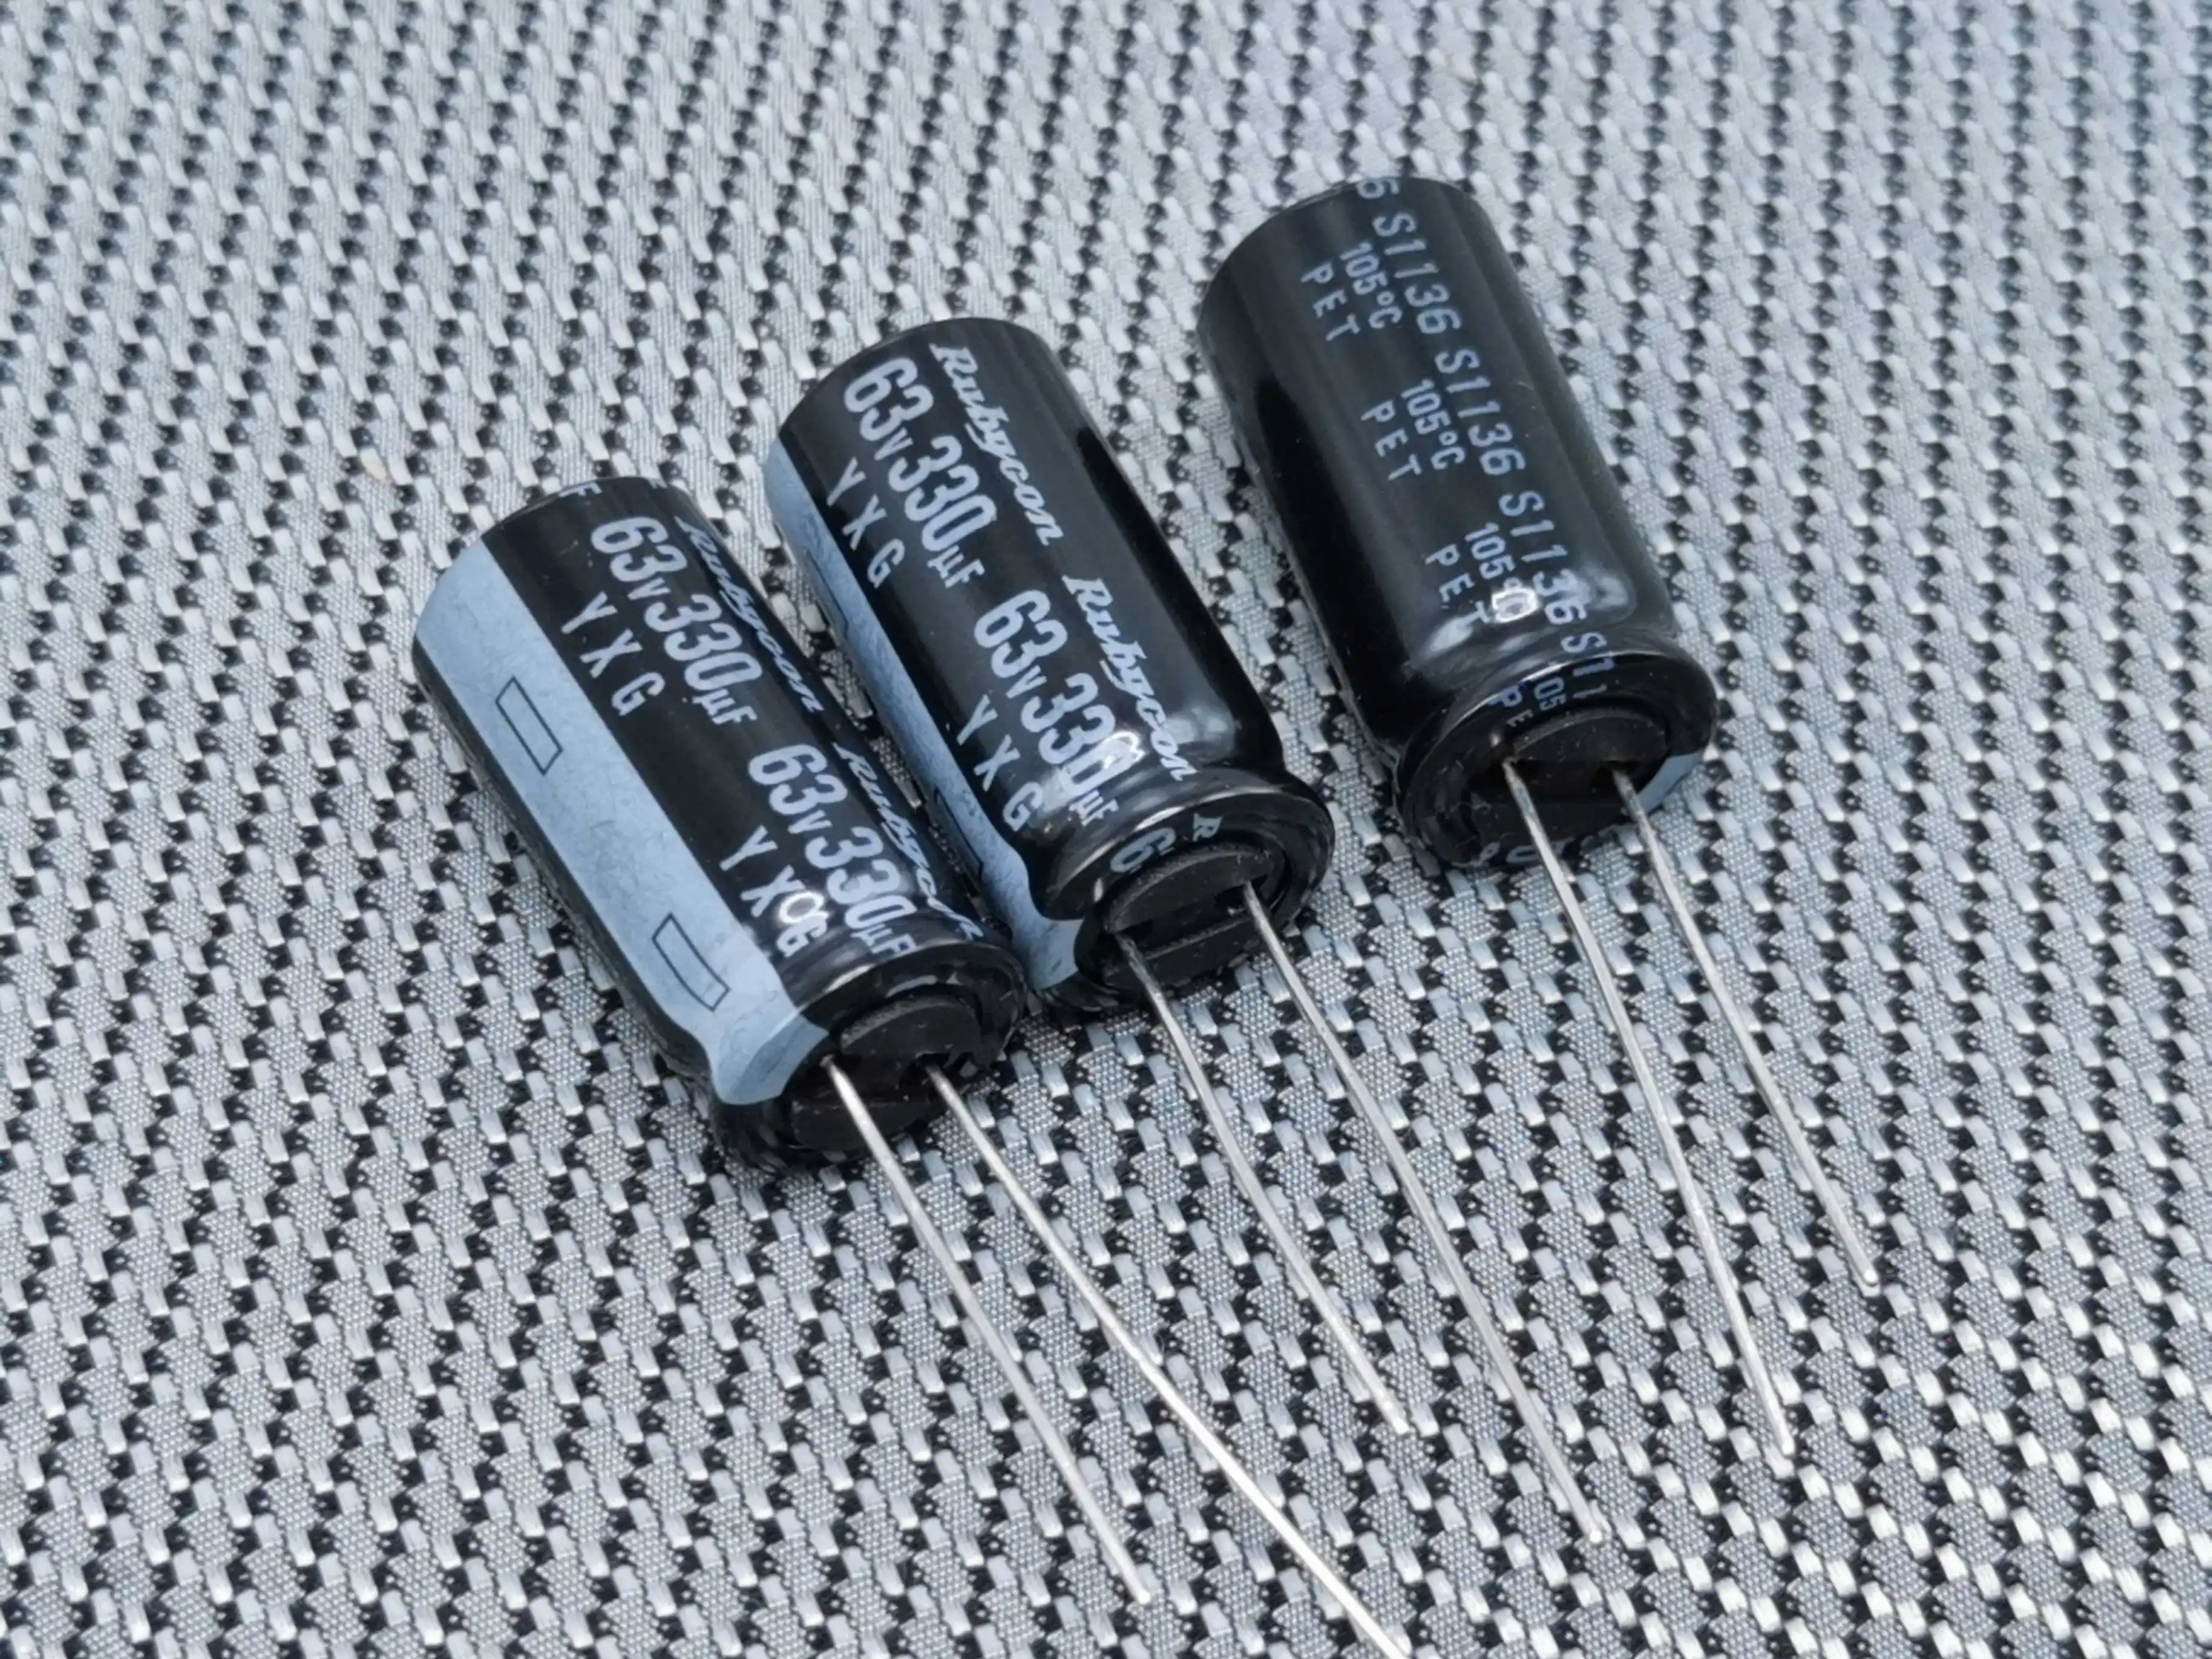 50pcs/lot RUBYCON YXG series 105C high frequency low resistance long life aluminum electrolytic capacitor free shipping